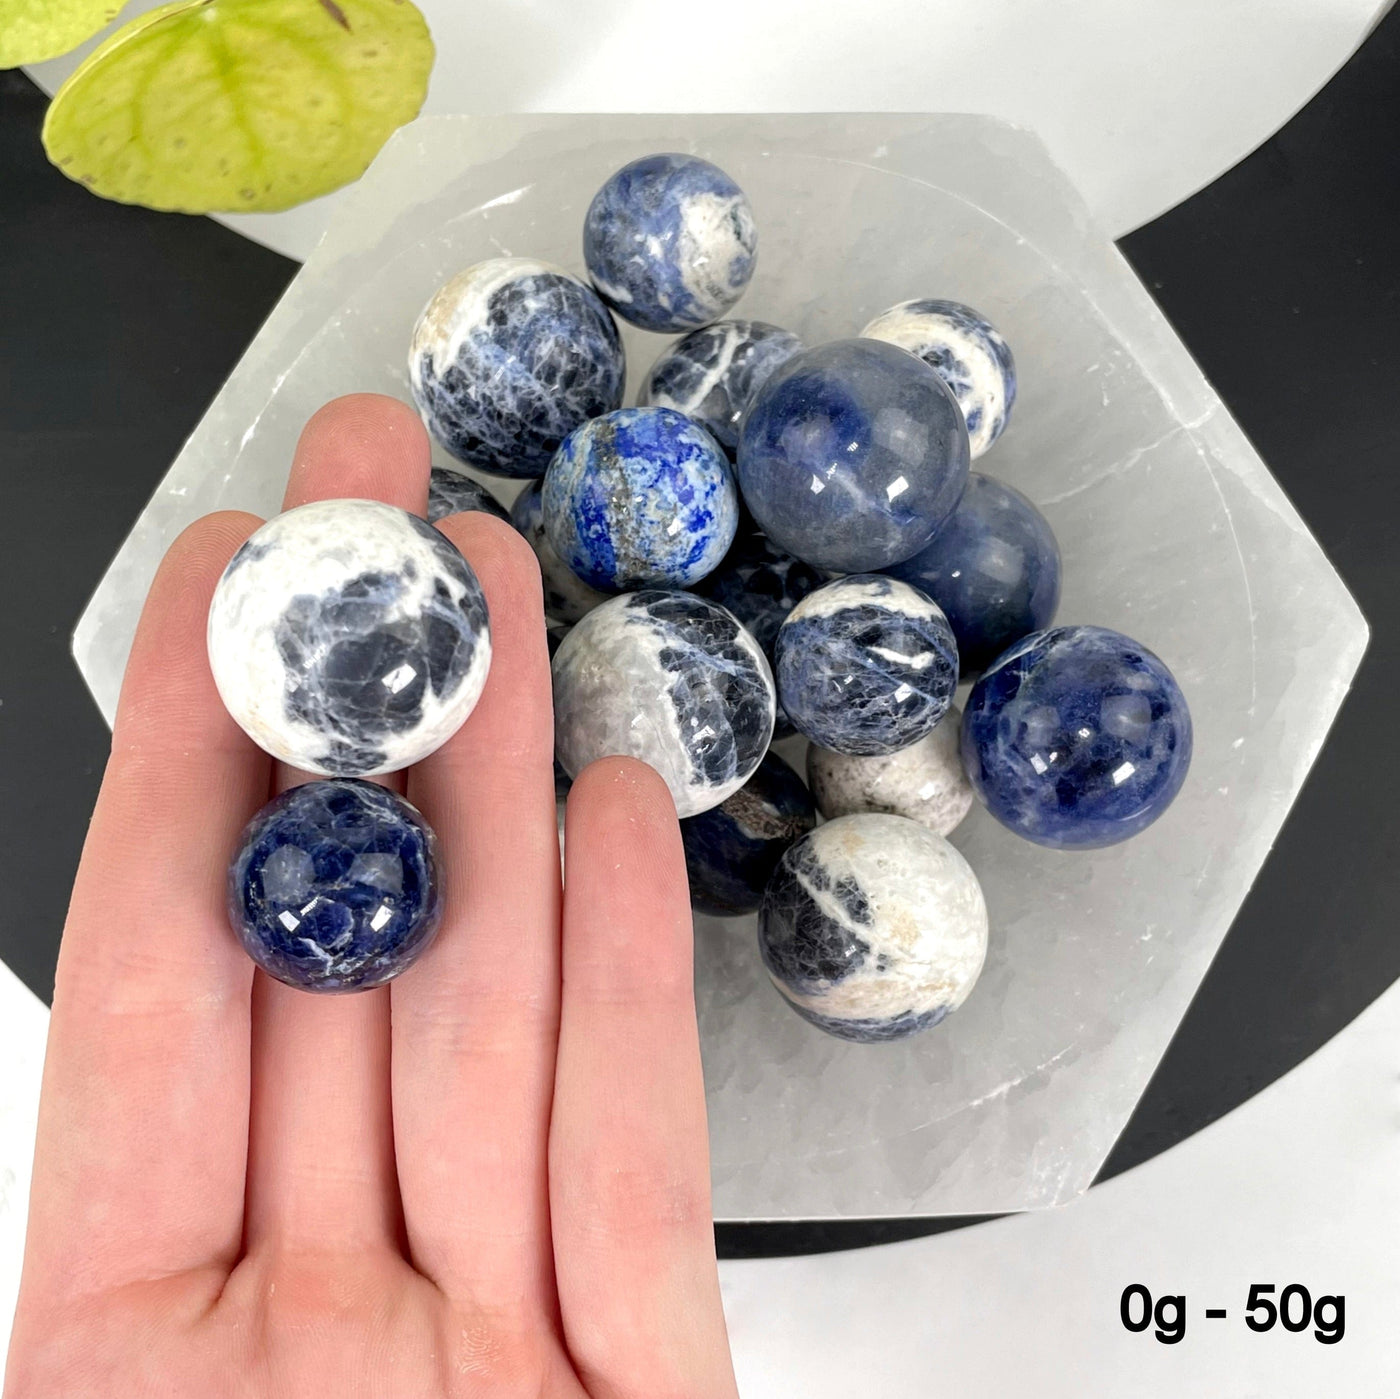 two 0g - 50g sodalite polished spheres in hand for size reference with many others in a bowl behind it for possible variations